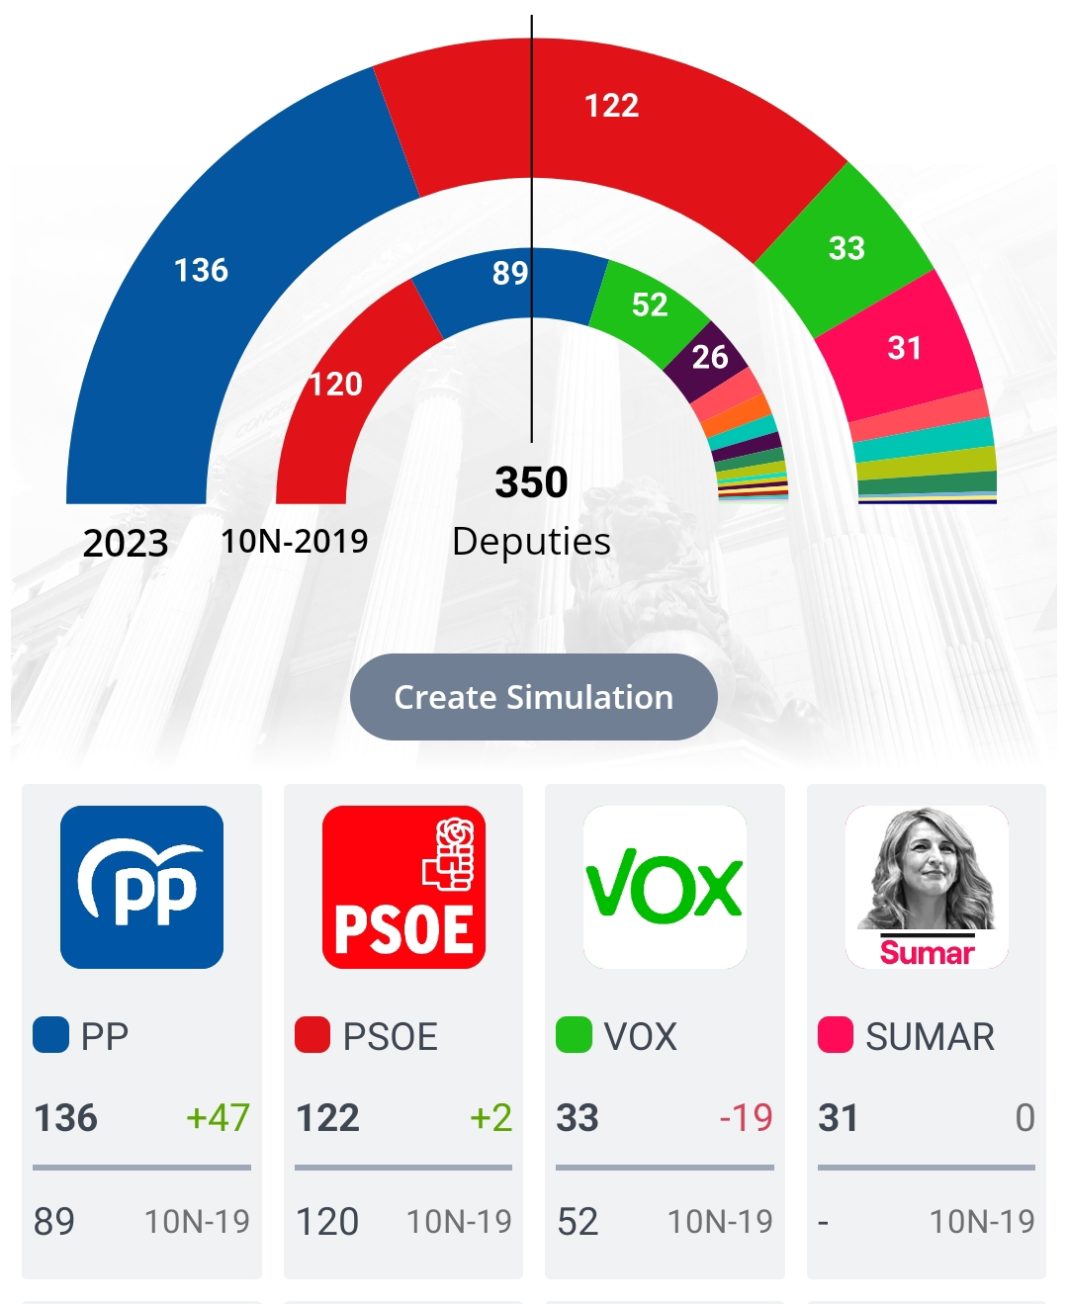 Huge gains for the PP but VOX takes a thrashing, so no overall winner in the elections (2)